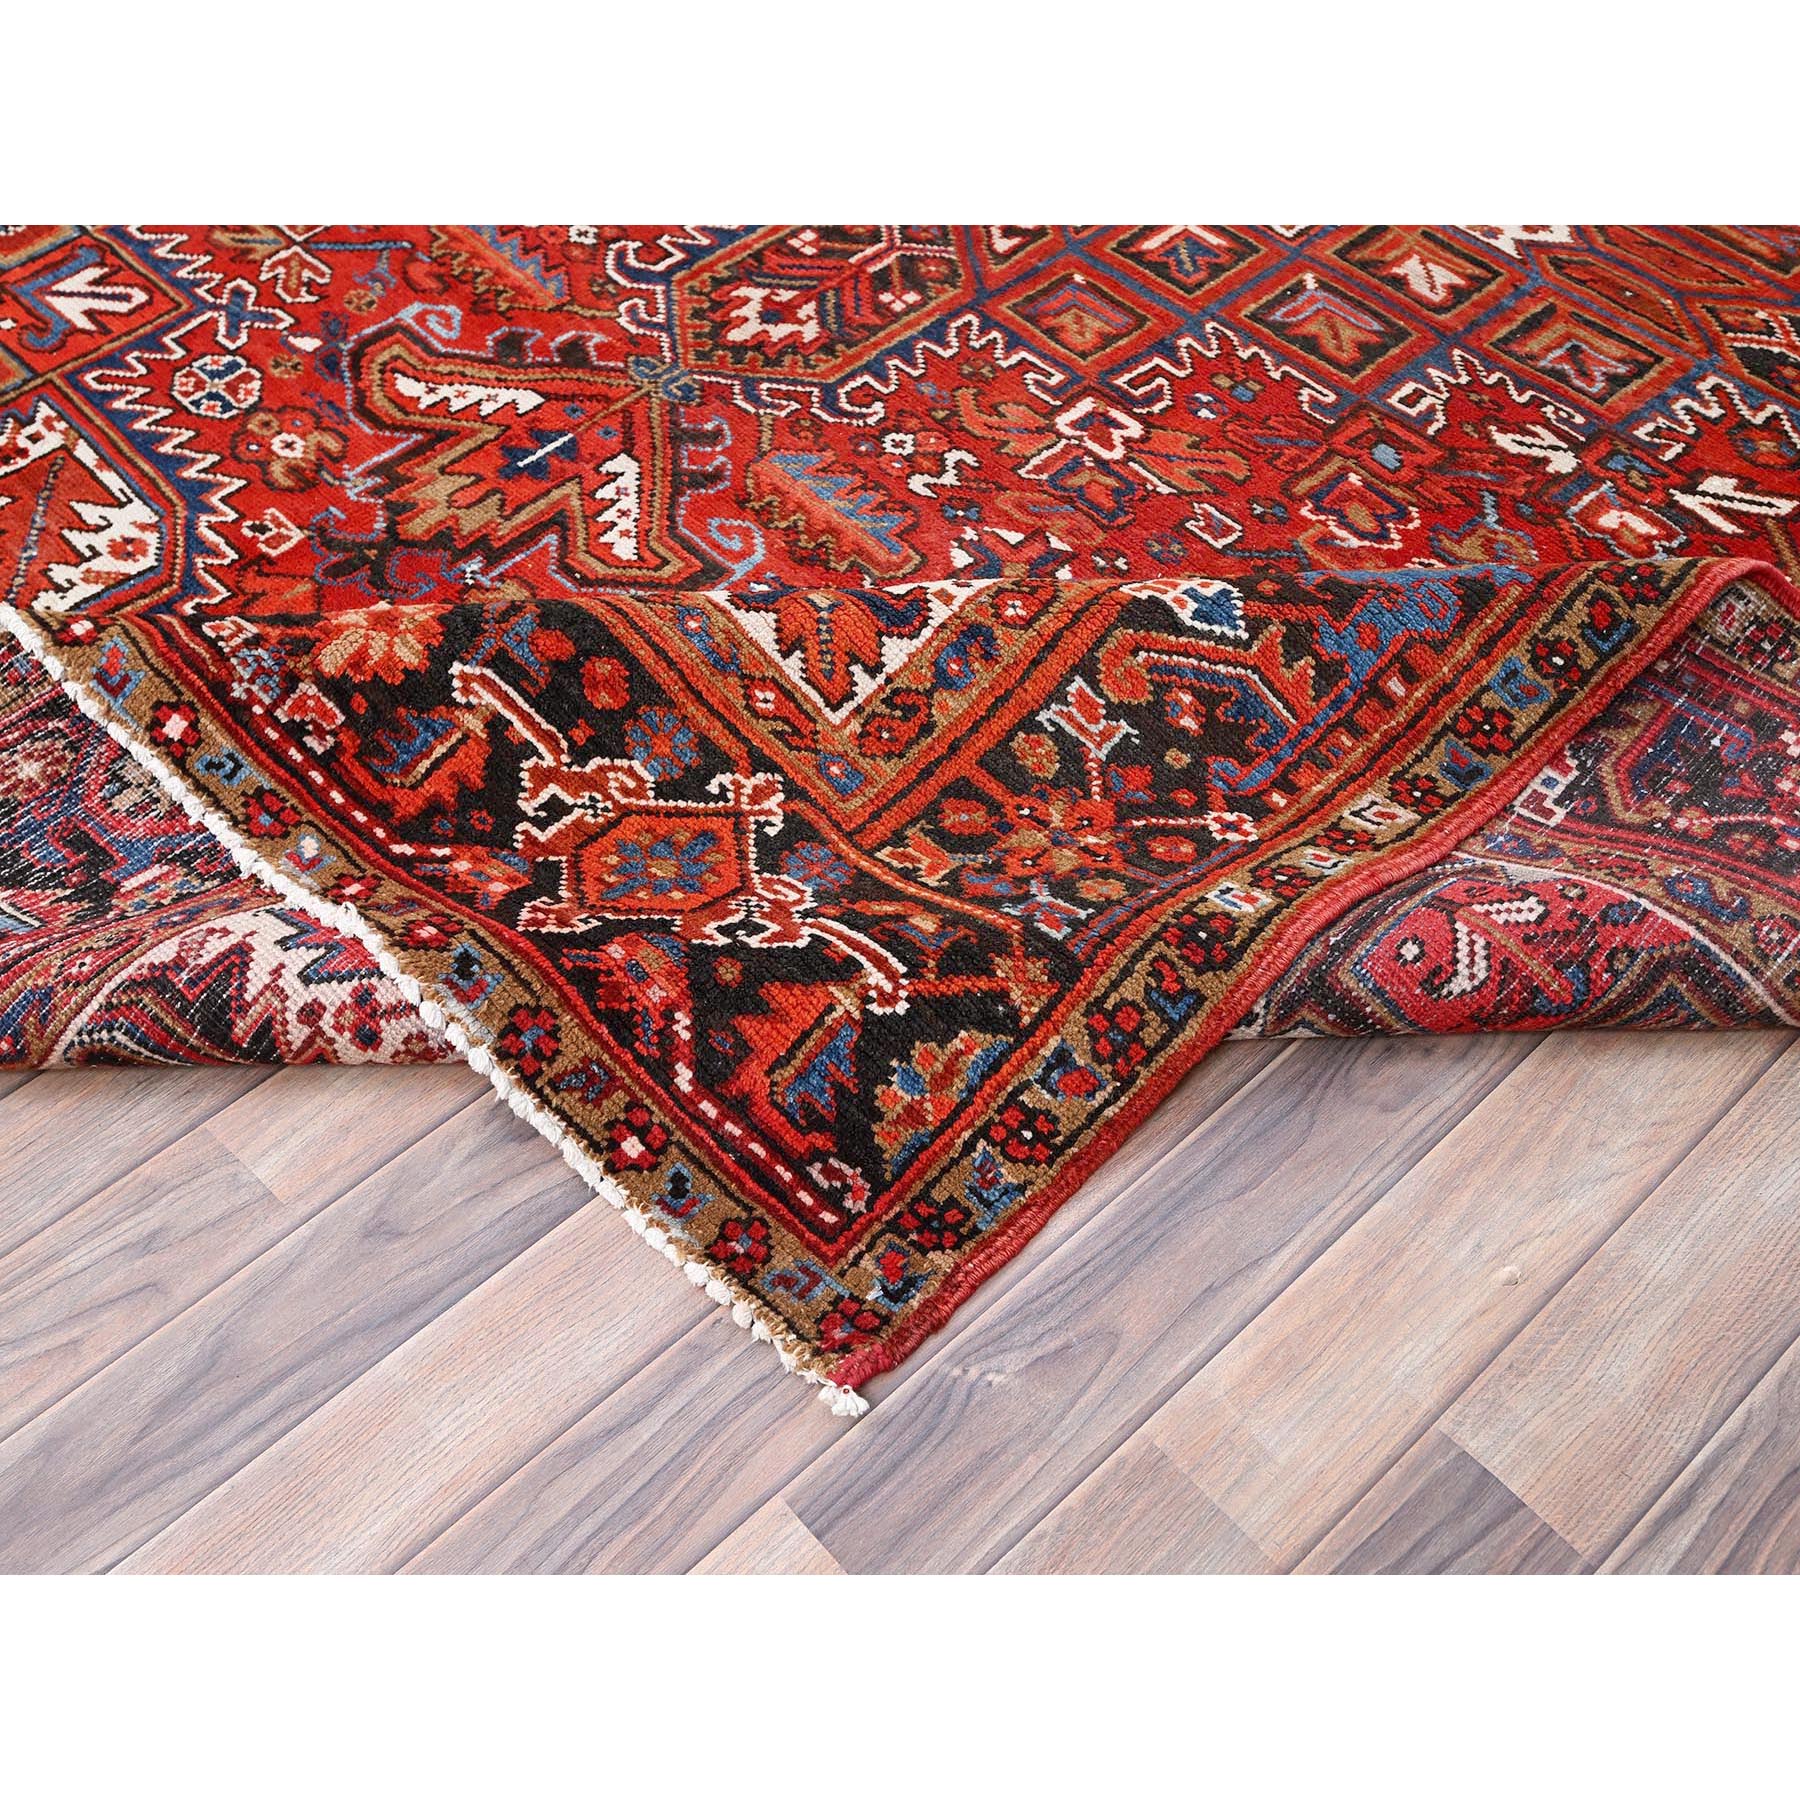 8'1"x10'5" Chili Red, Hand Woven, Vintage Persian Heriz with Tribal Ambience, Good Condition, Distressed Feel, Evenly Worn, Pure Wool, Oriental Rug 